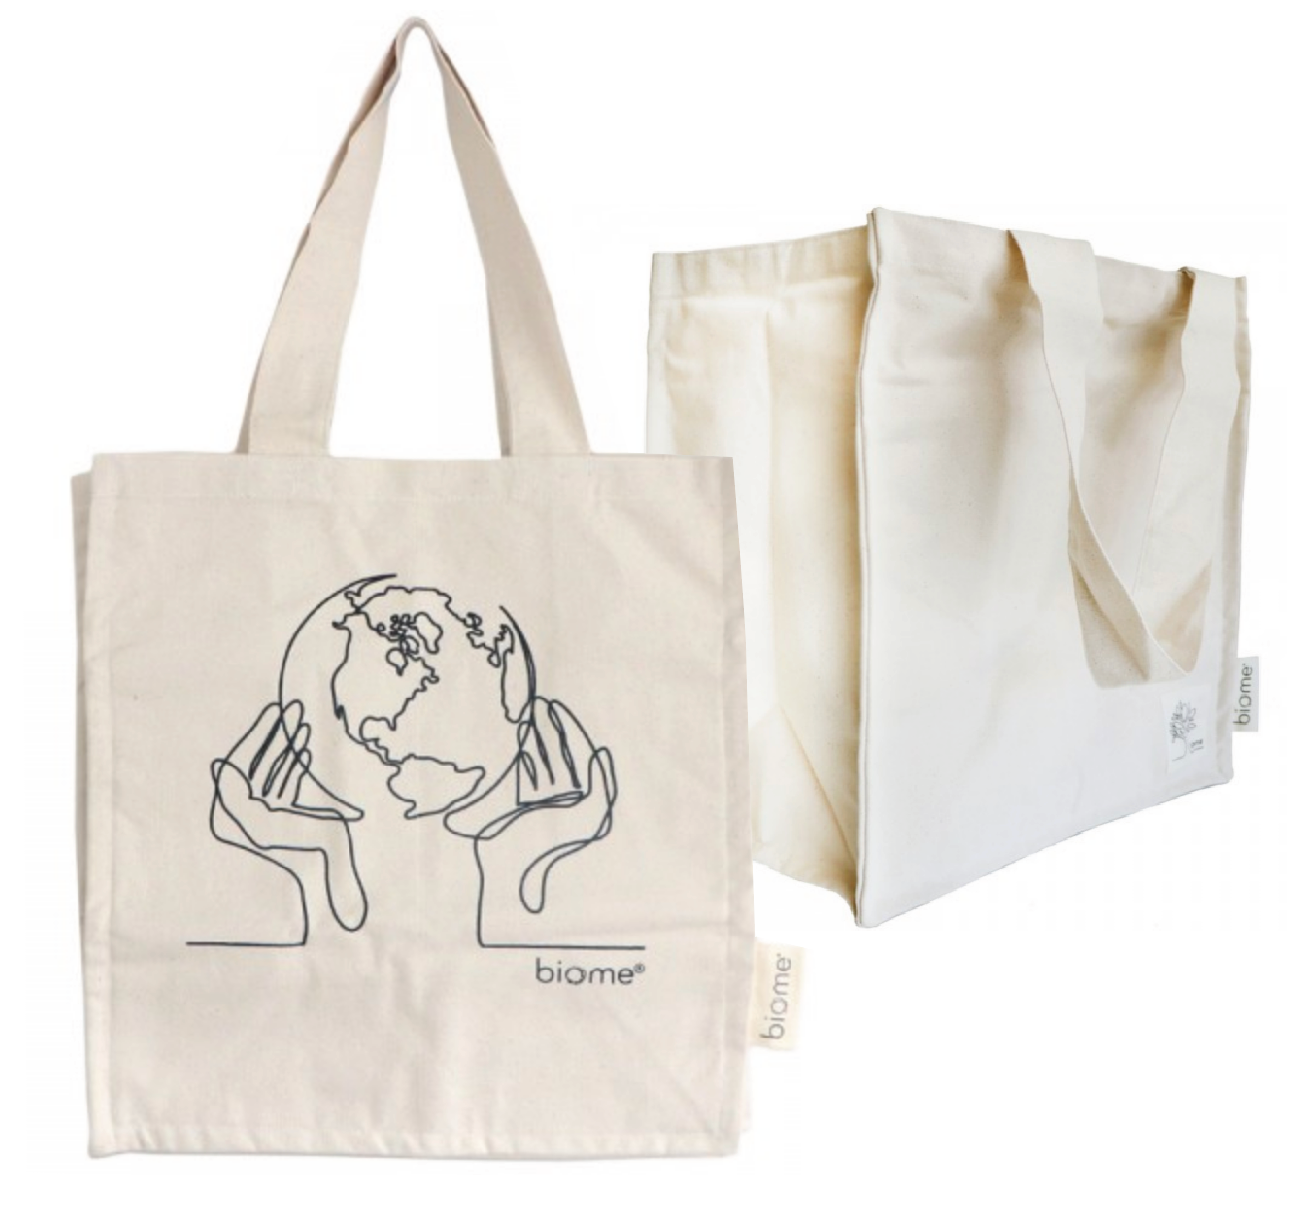 Biome - Organic cotton canvas tote bag - 'World in Our Hands'